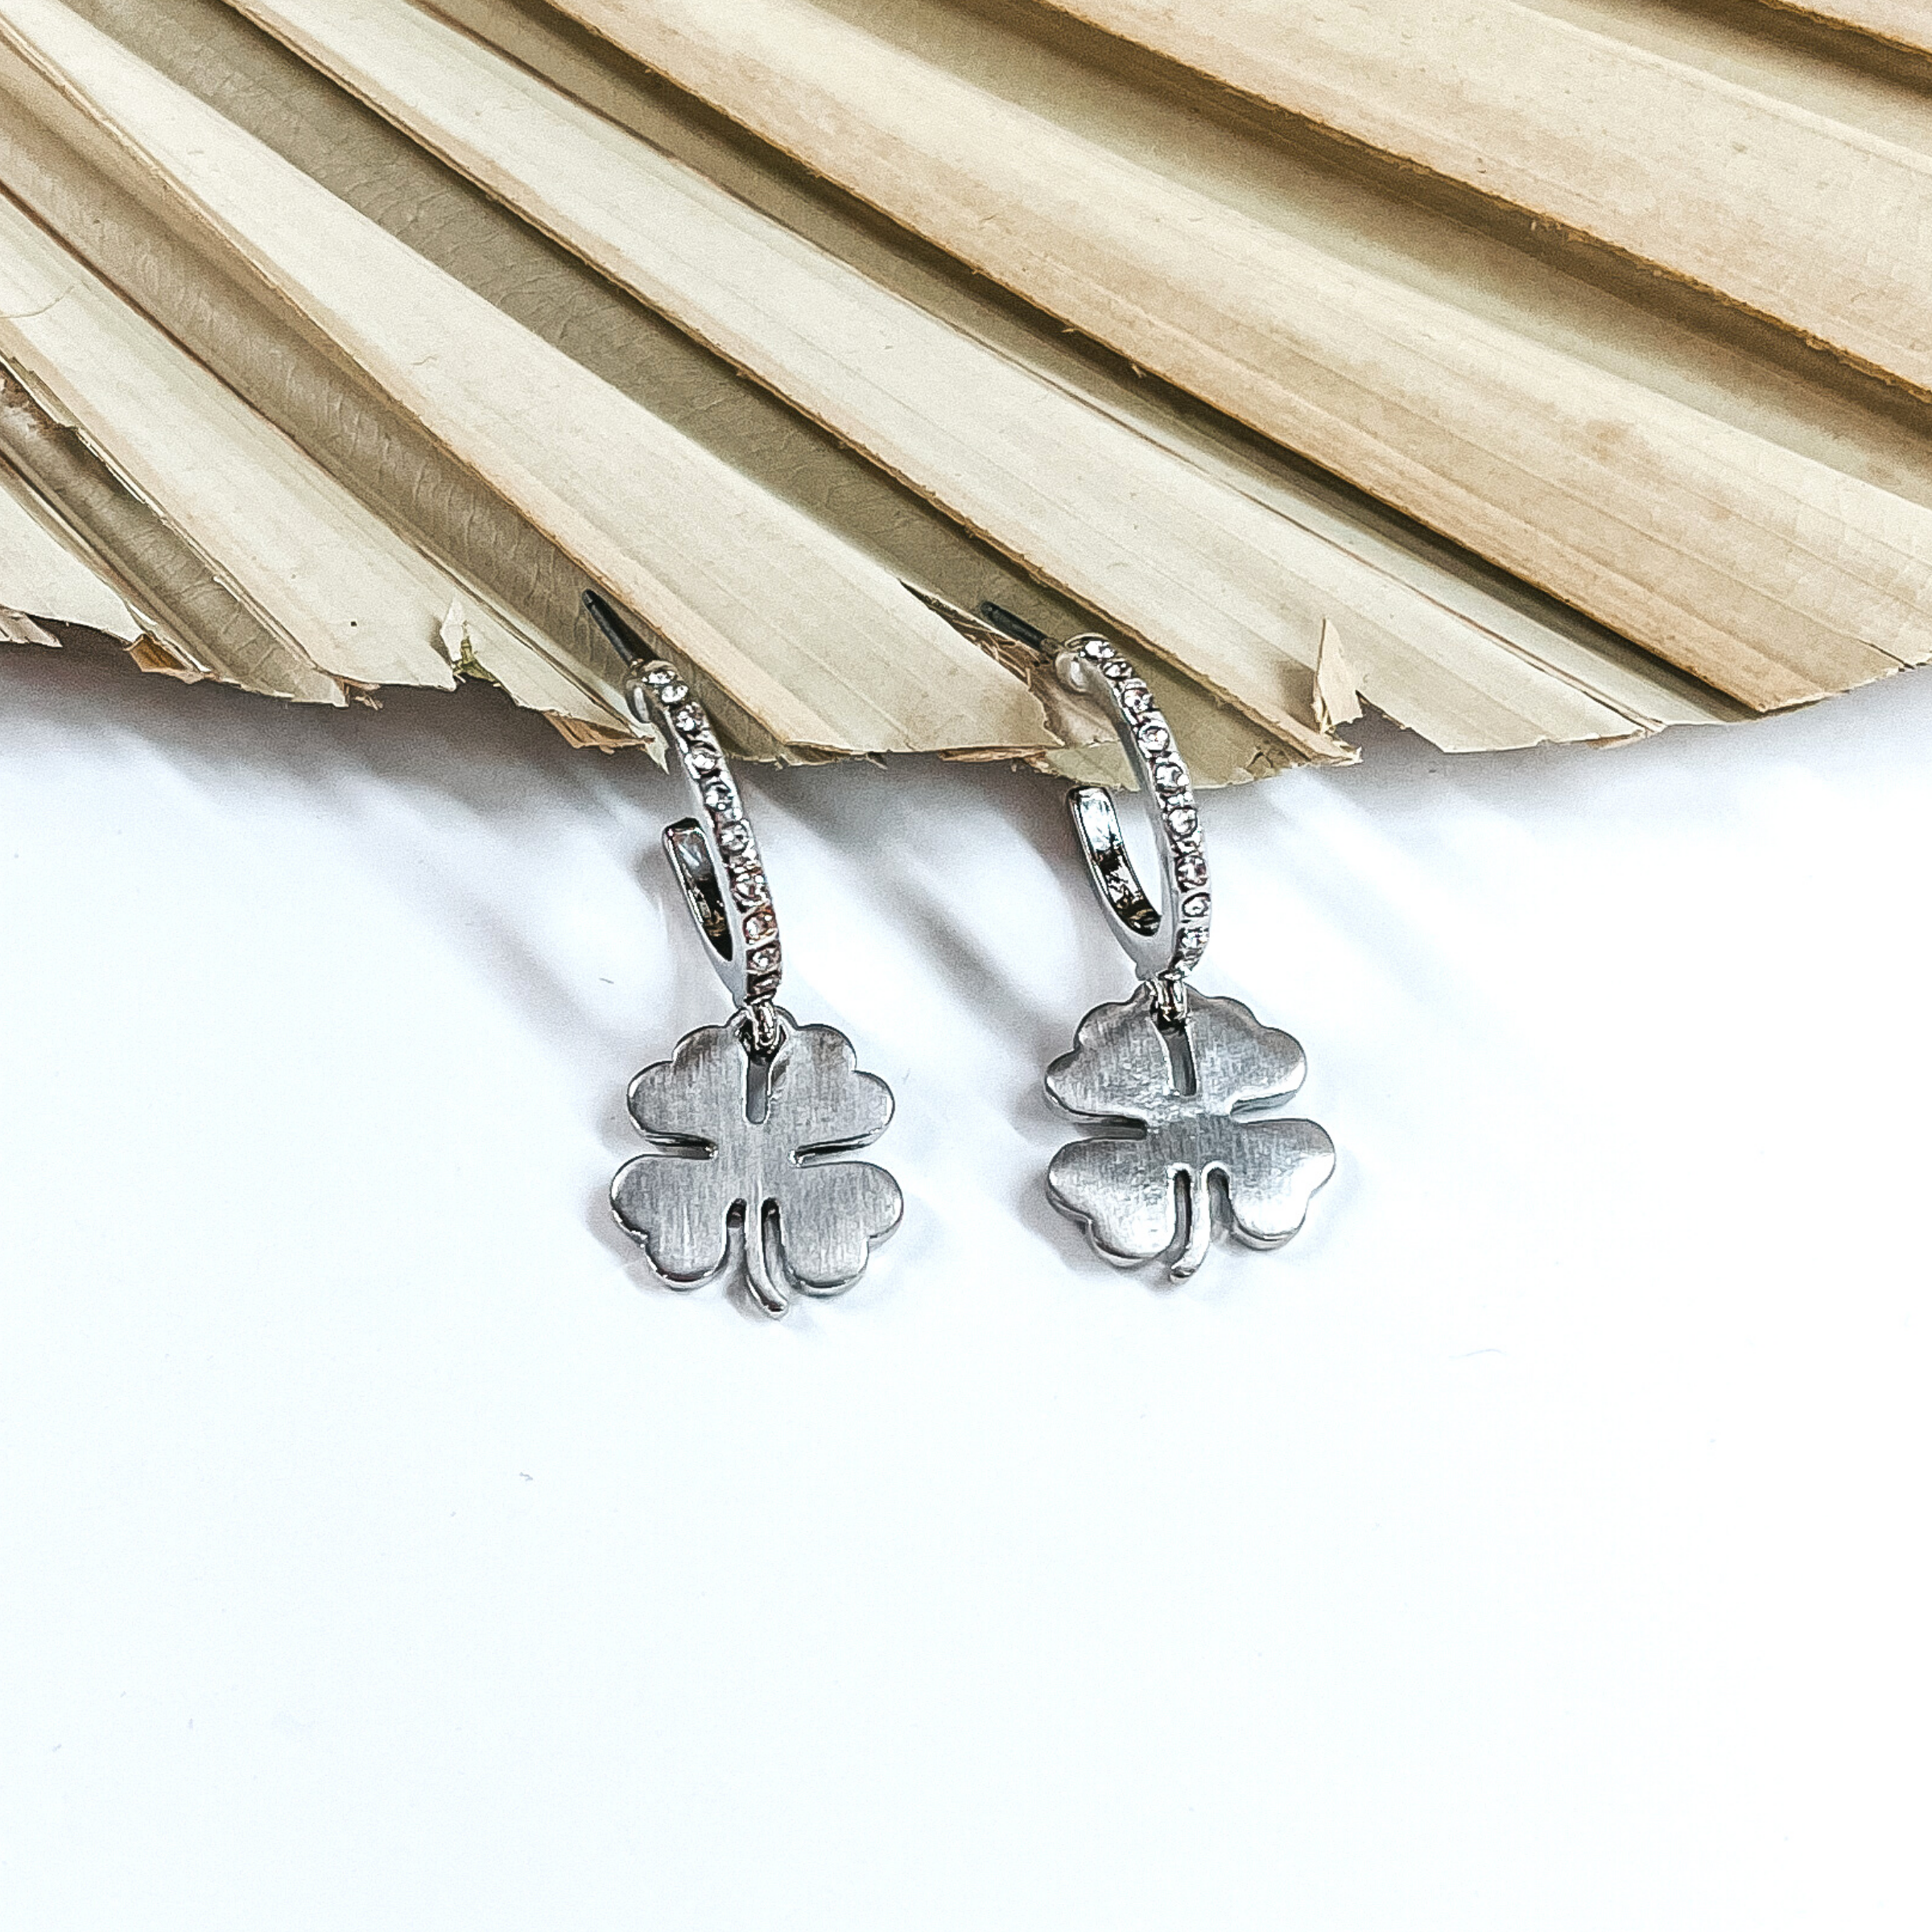 Silver hoops that has a clear crystals. It also has a hanging silver four leaf clover charm. These hoops are pictured in front of a dried leaf on a white background.